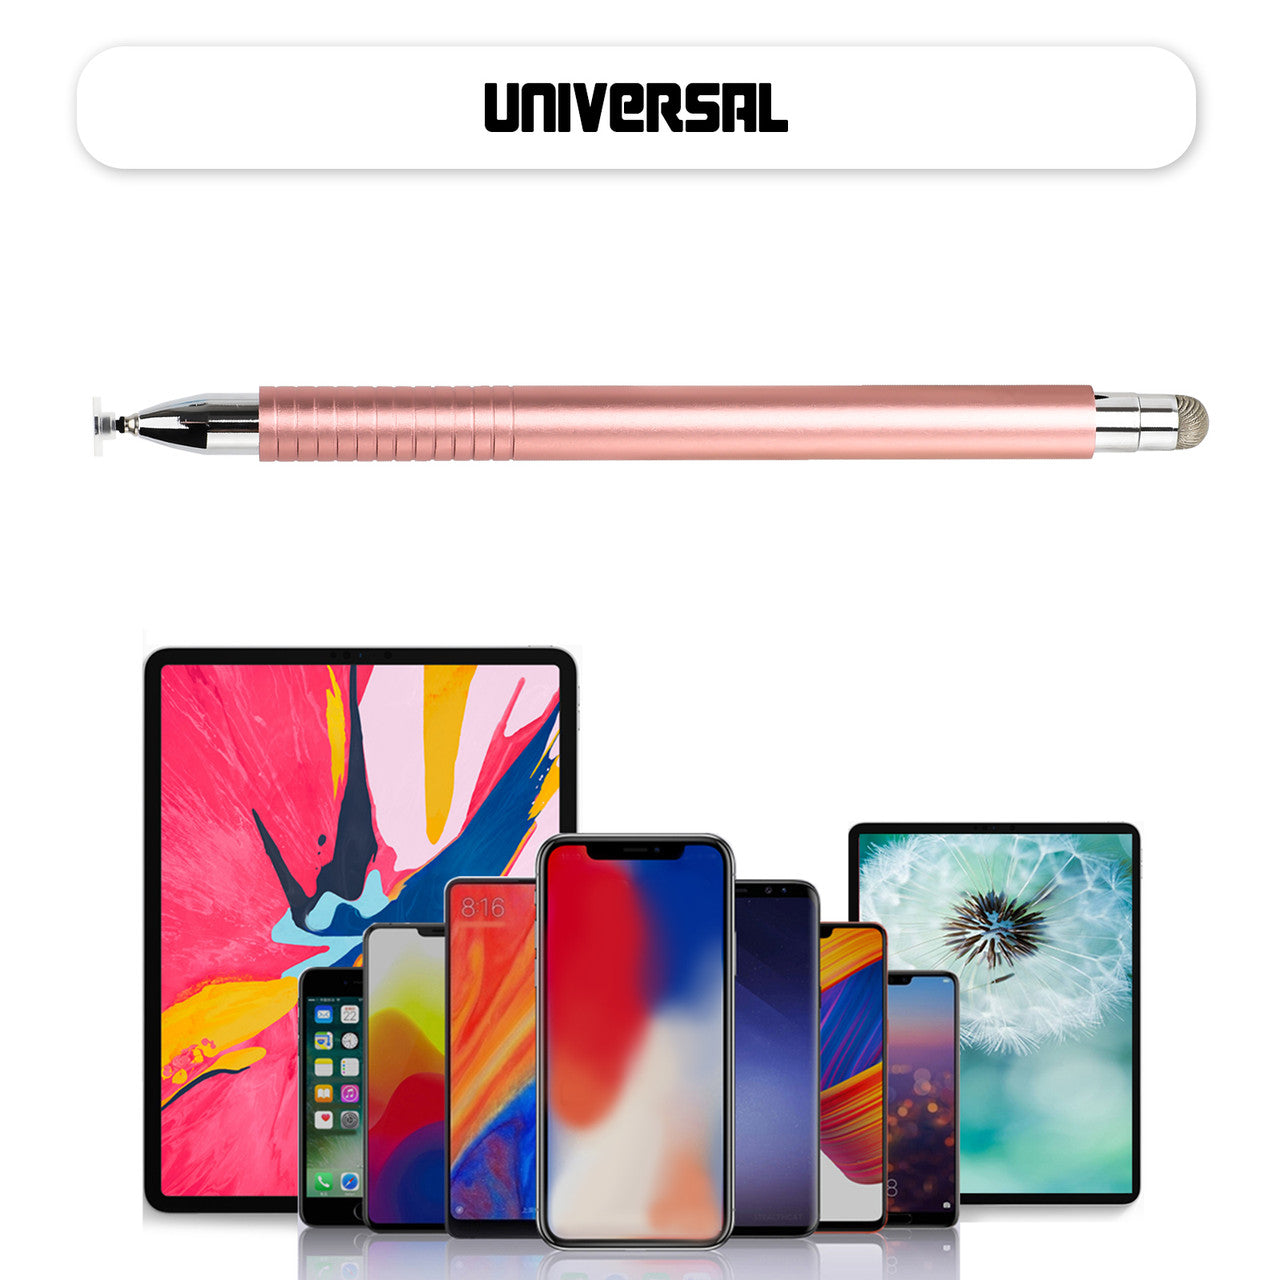 New 2 in 1 Universal Touch Screen Stylus Pen Compatible for iPhone Samsung iPad Android Phones (Rose Gold)